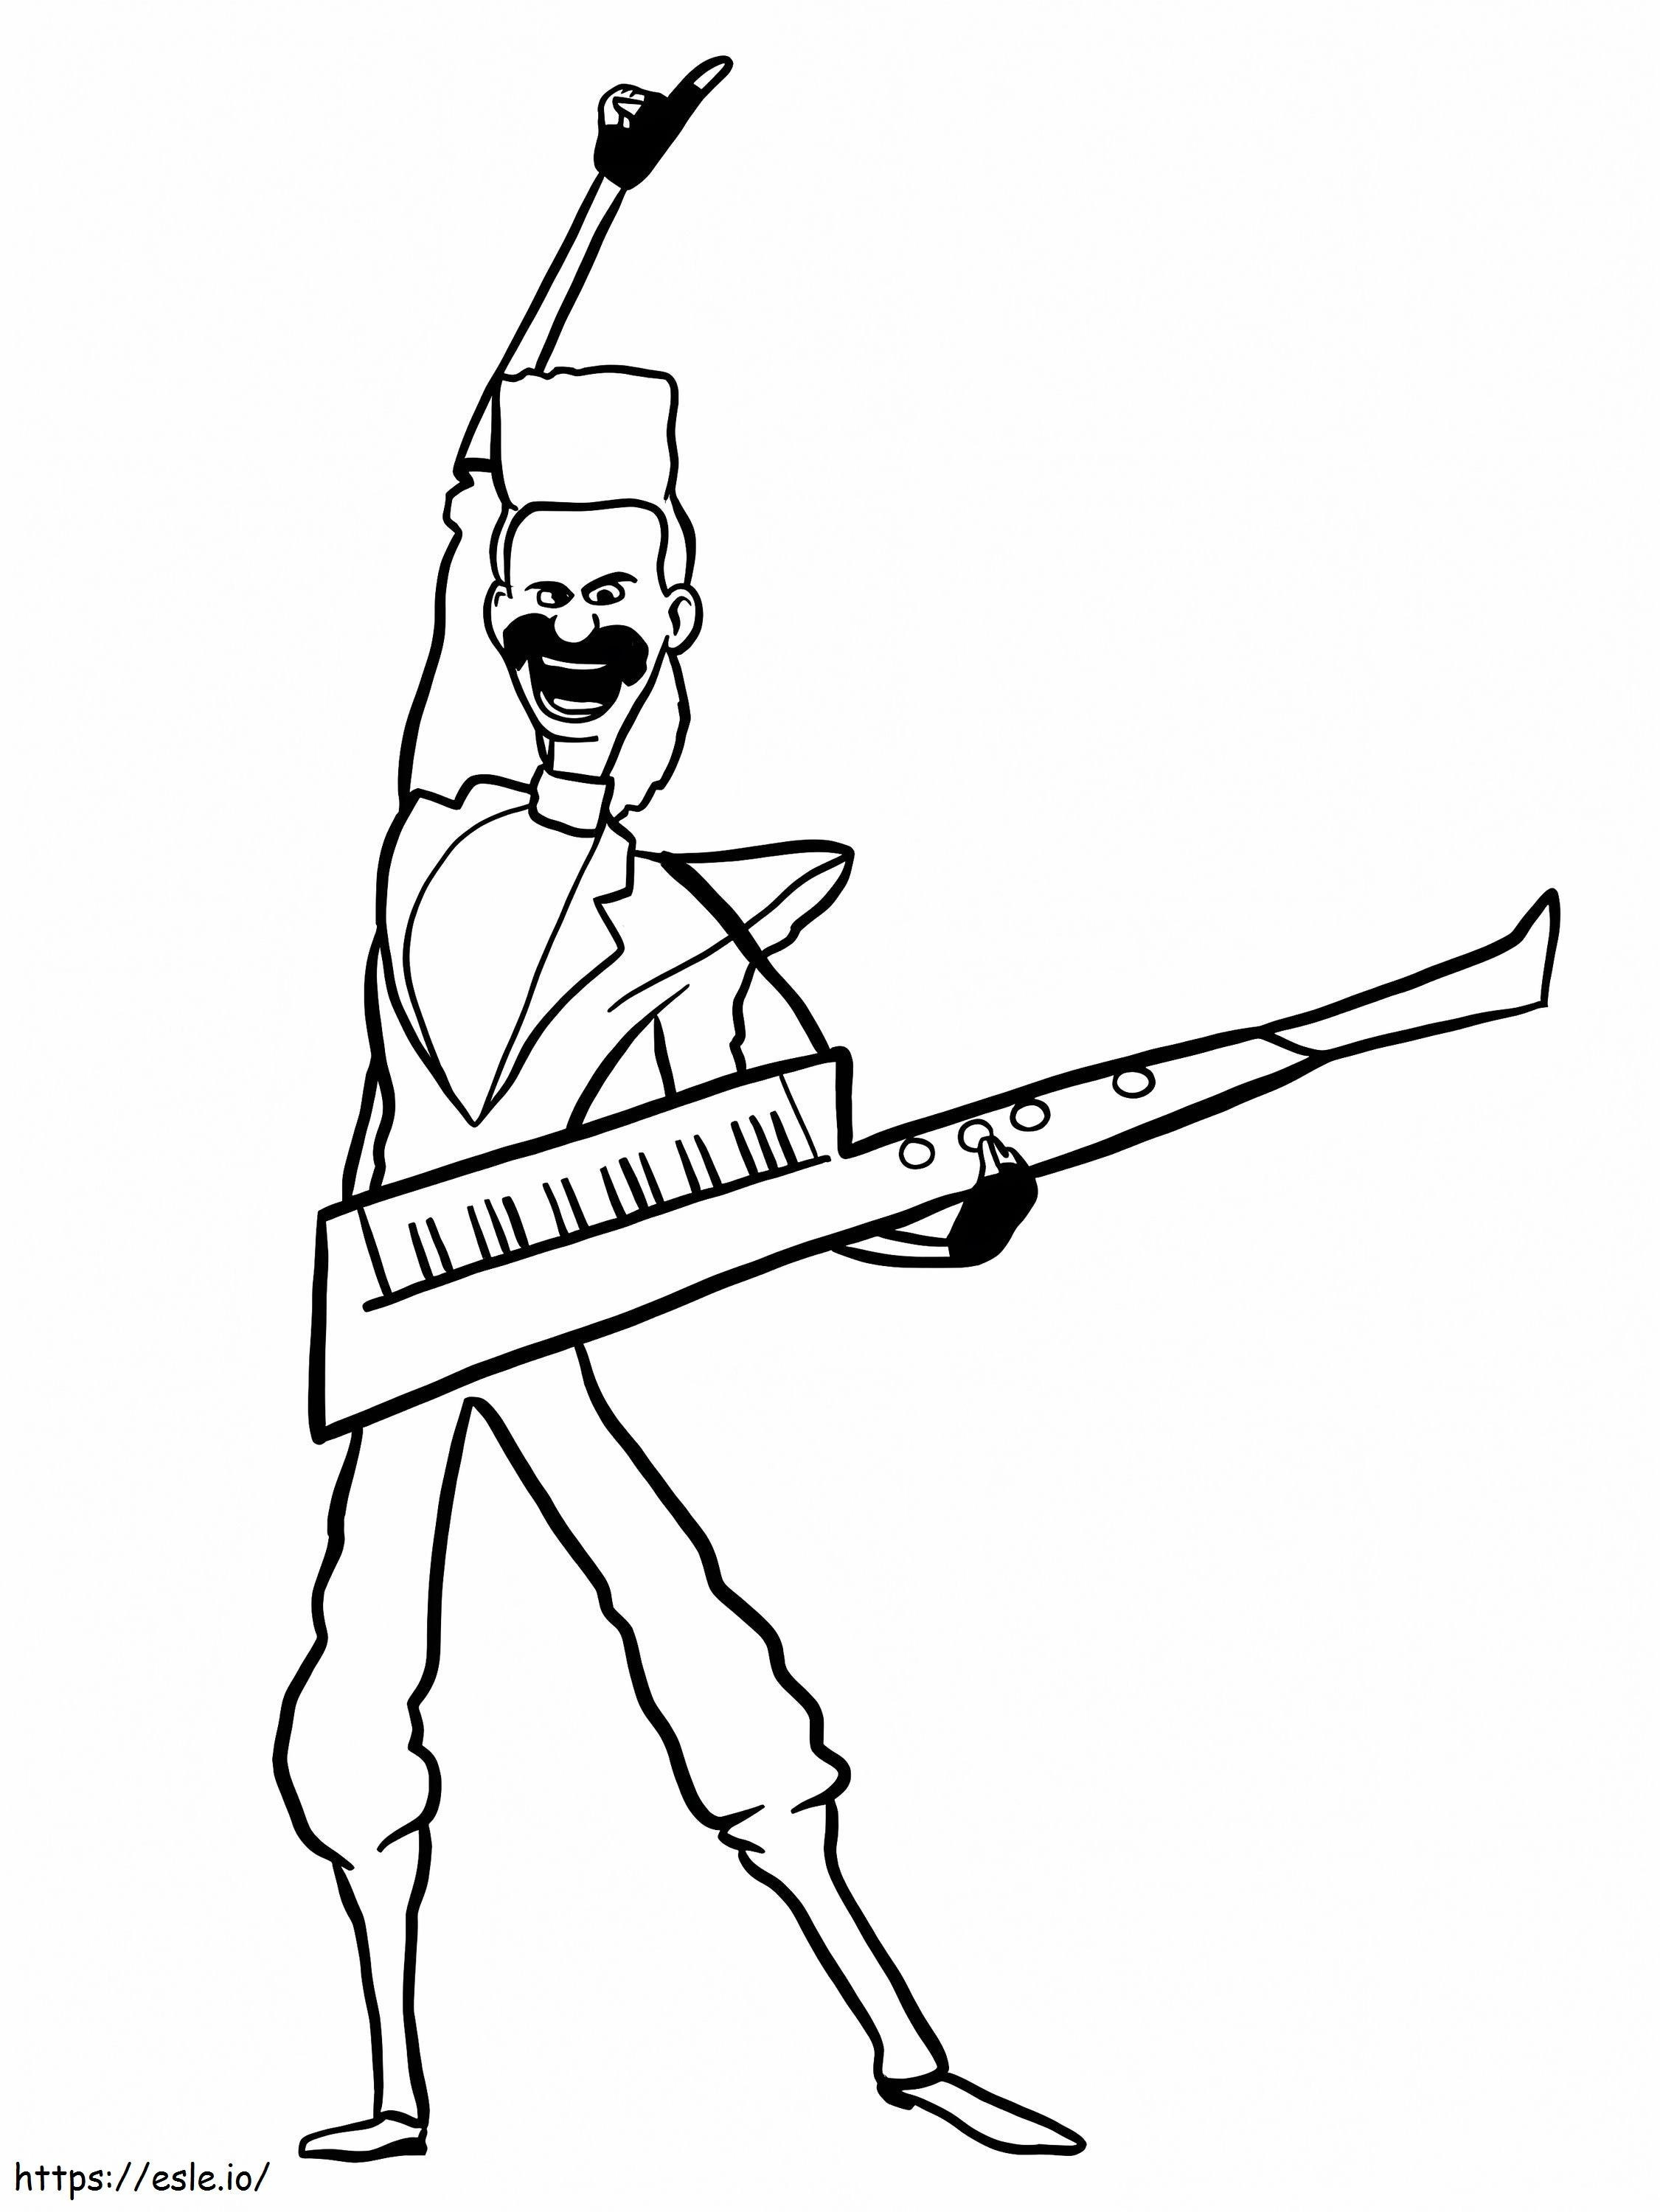 Balthazar Bratt From Despicable Me 3 coloring page